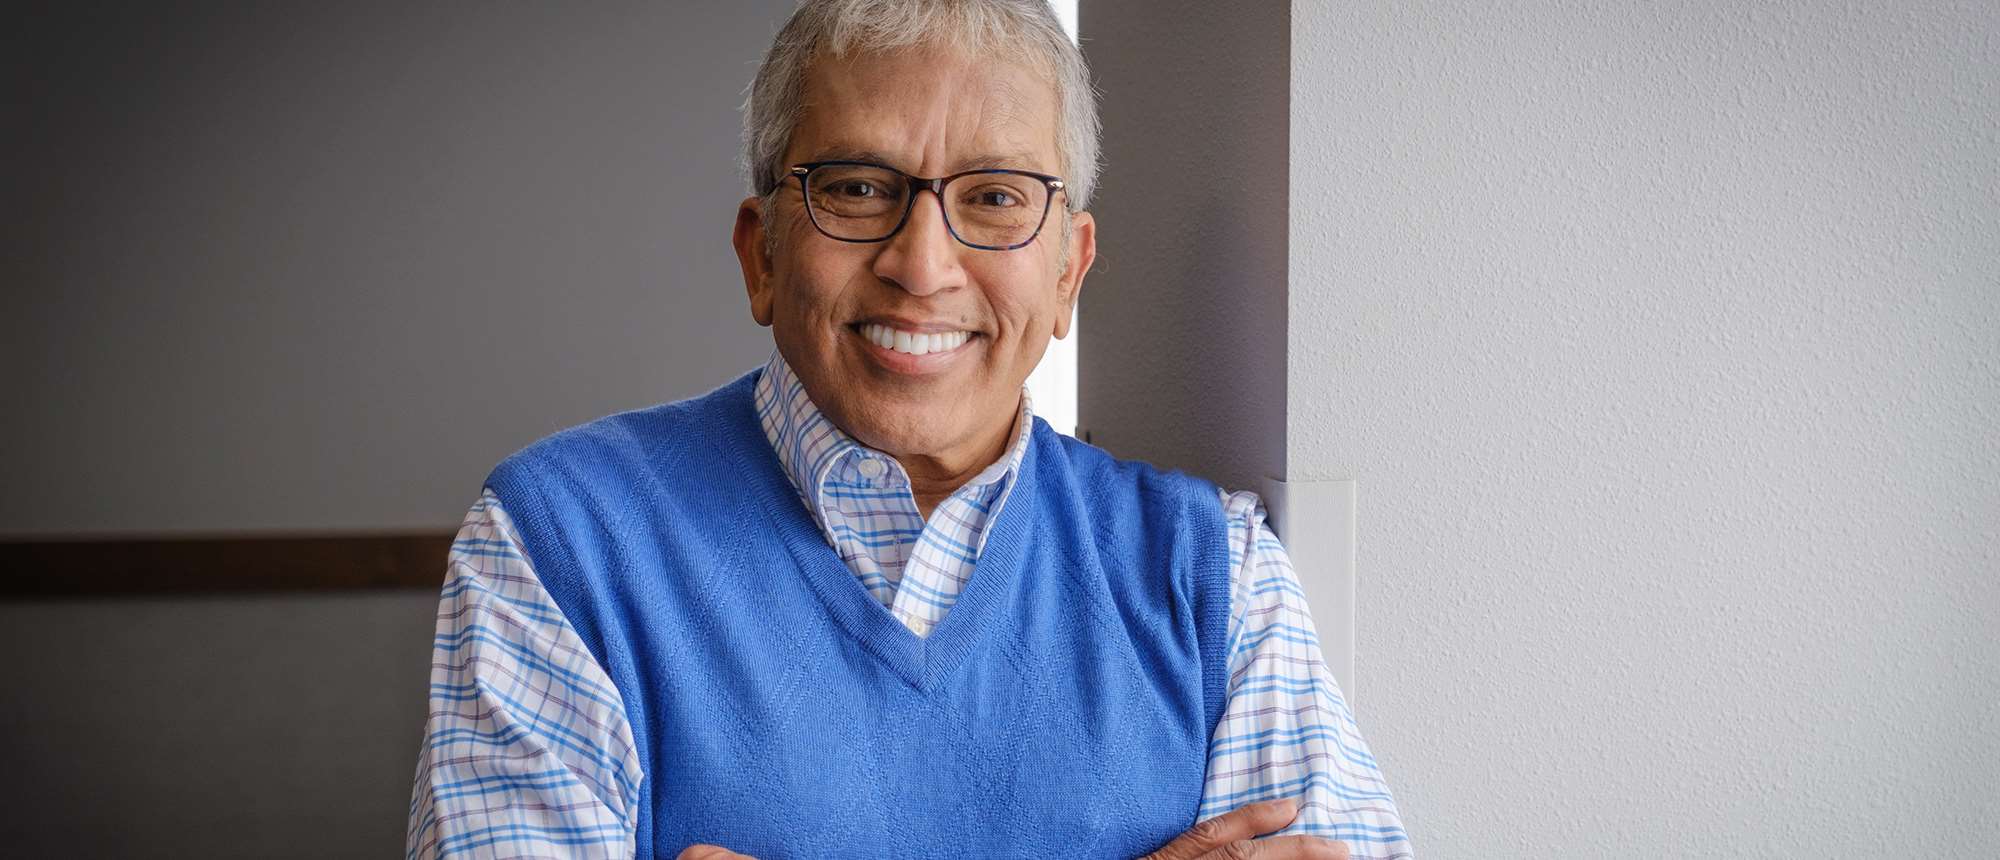 A physician’s journey to humility and gratitude | Sridhar (SRI) Vasudevan, MD, GME ’77